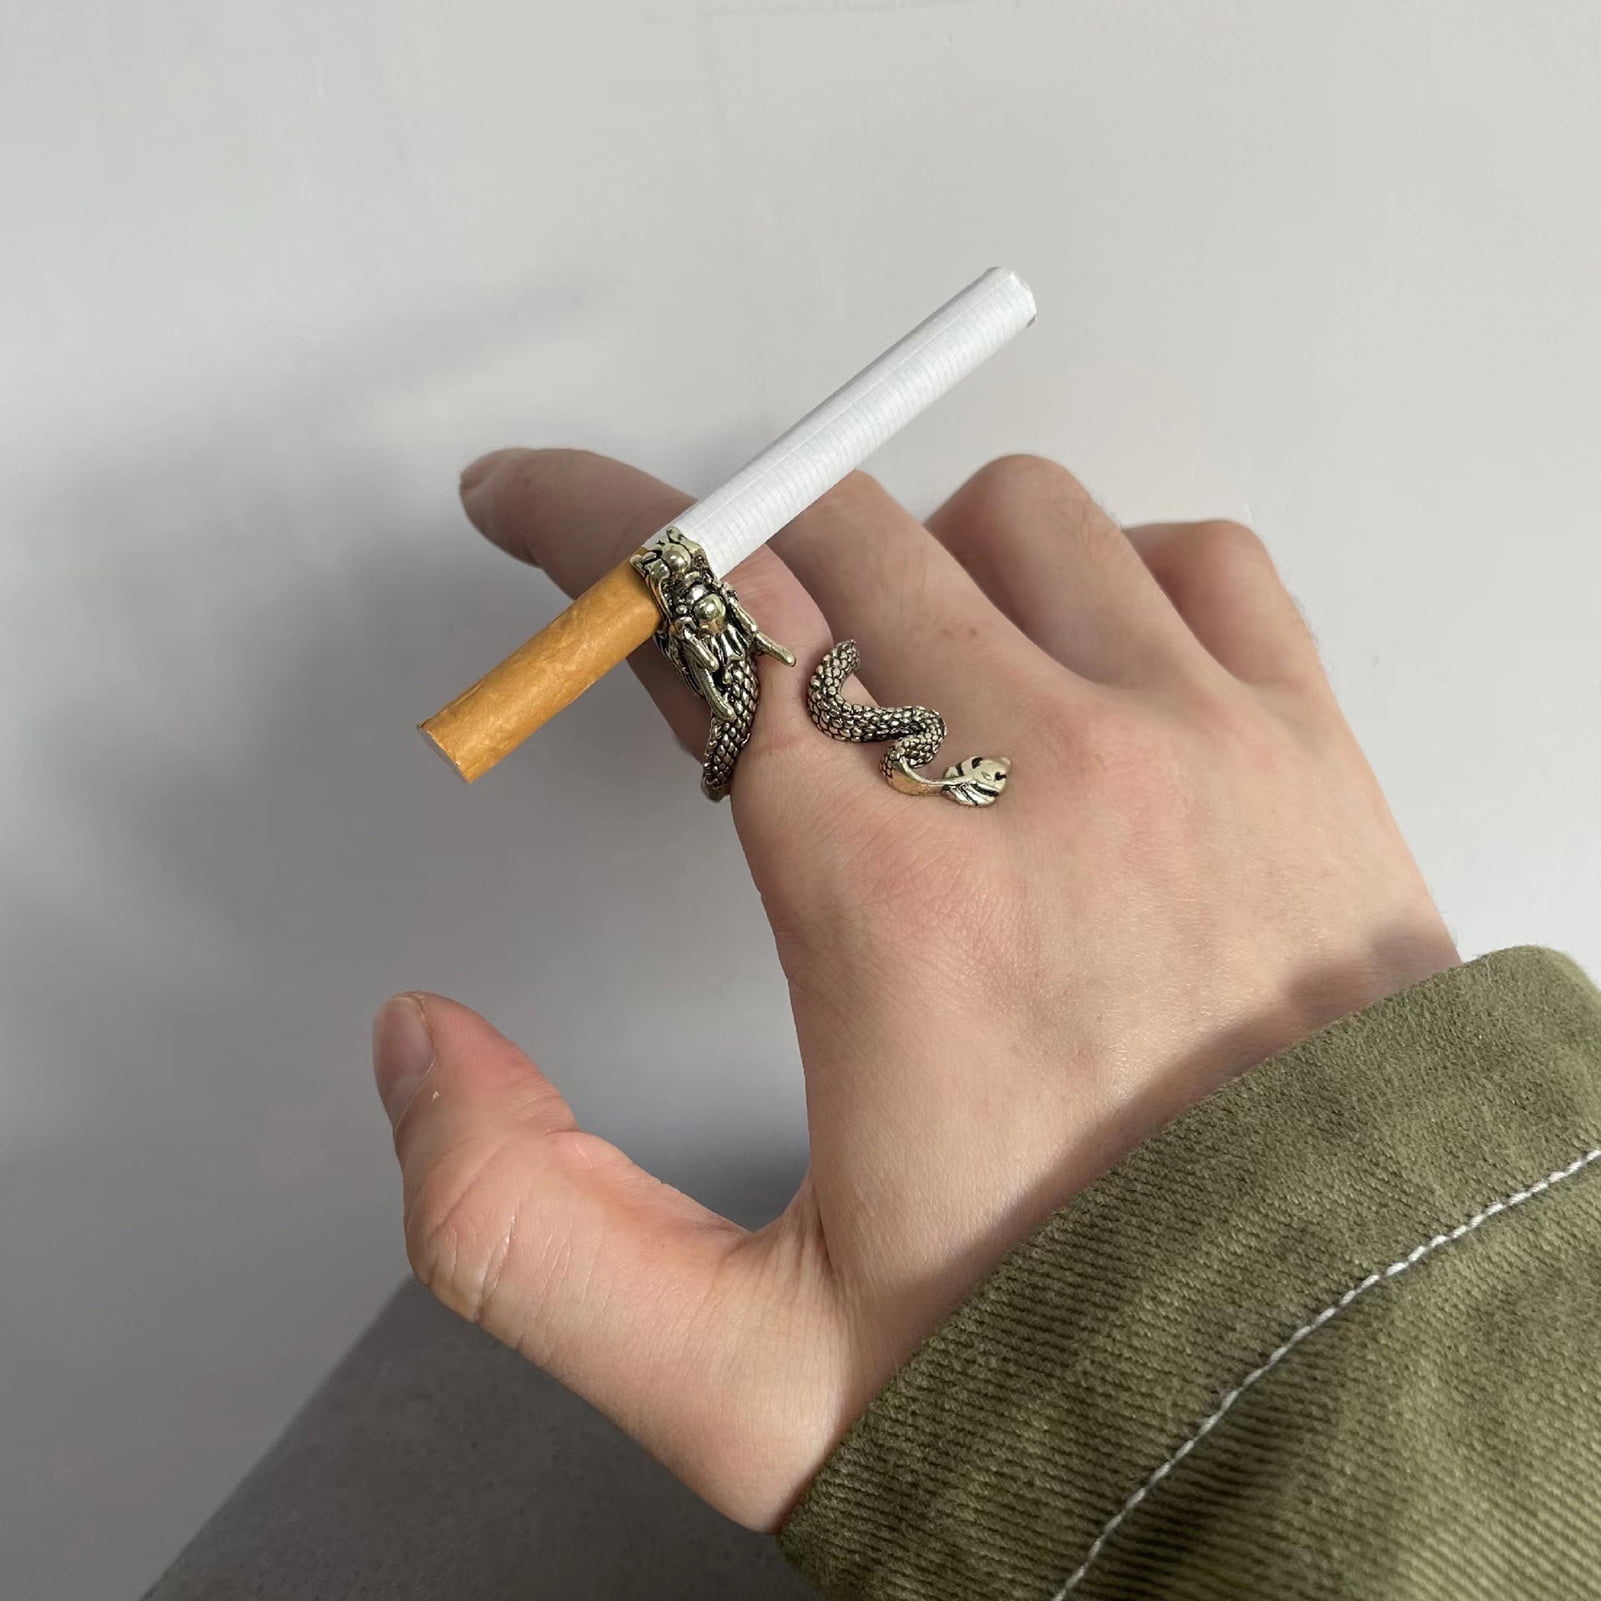 Rubber ring - cigarette holder - TETNY Smoking Shop Raw rolling papers and  tobacco